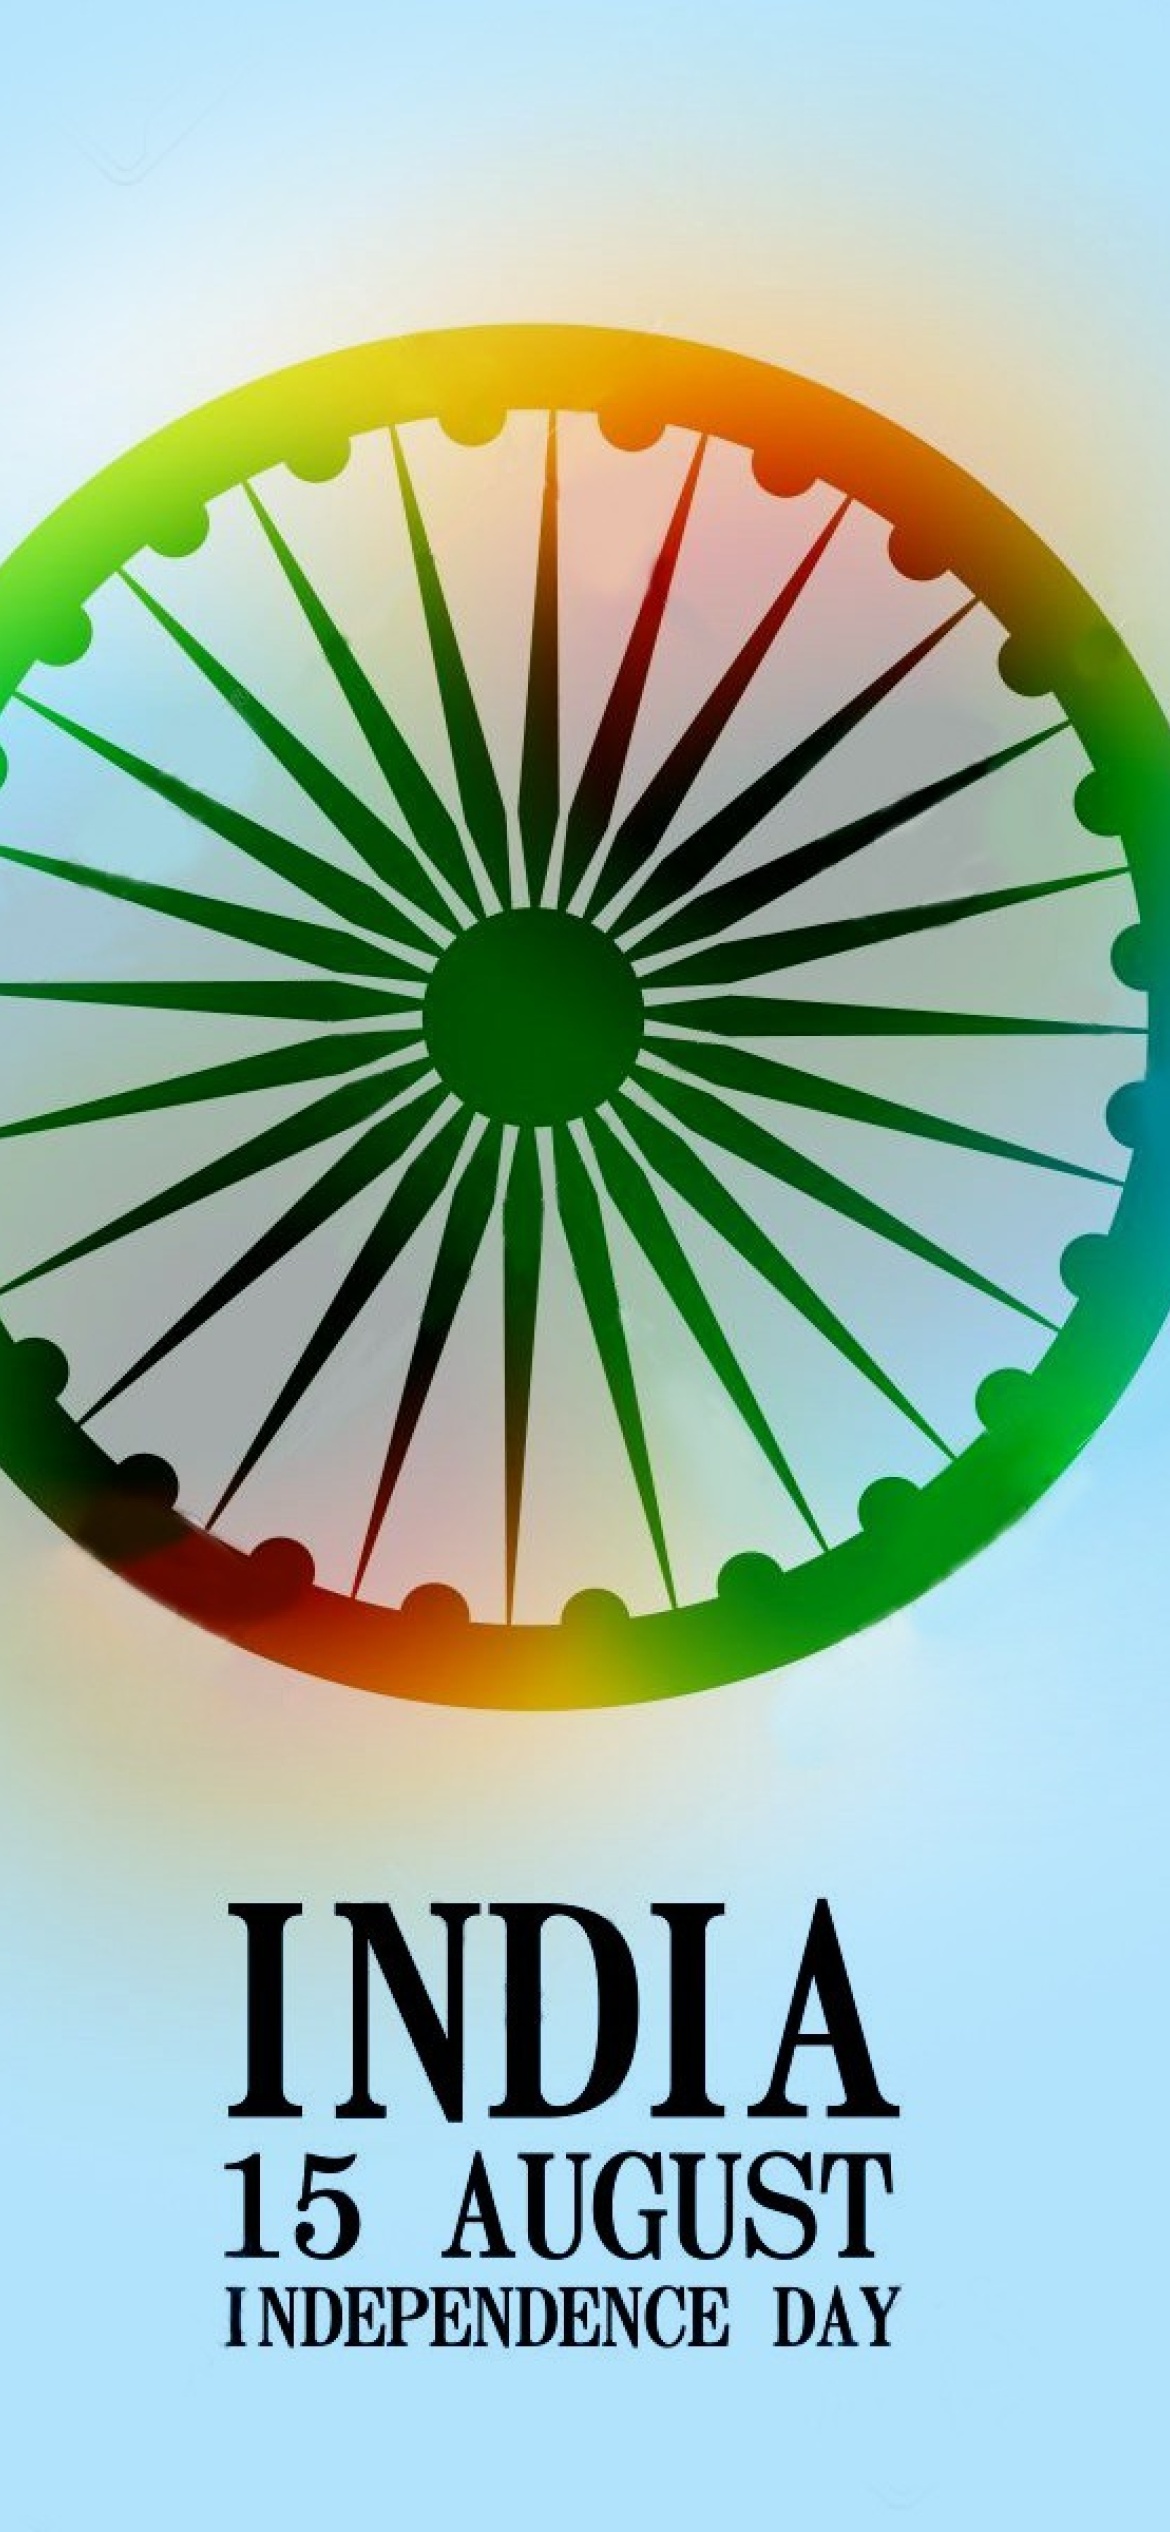 Sfondi India Independence Day 15 August 1170x2532